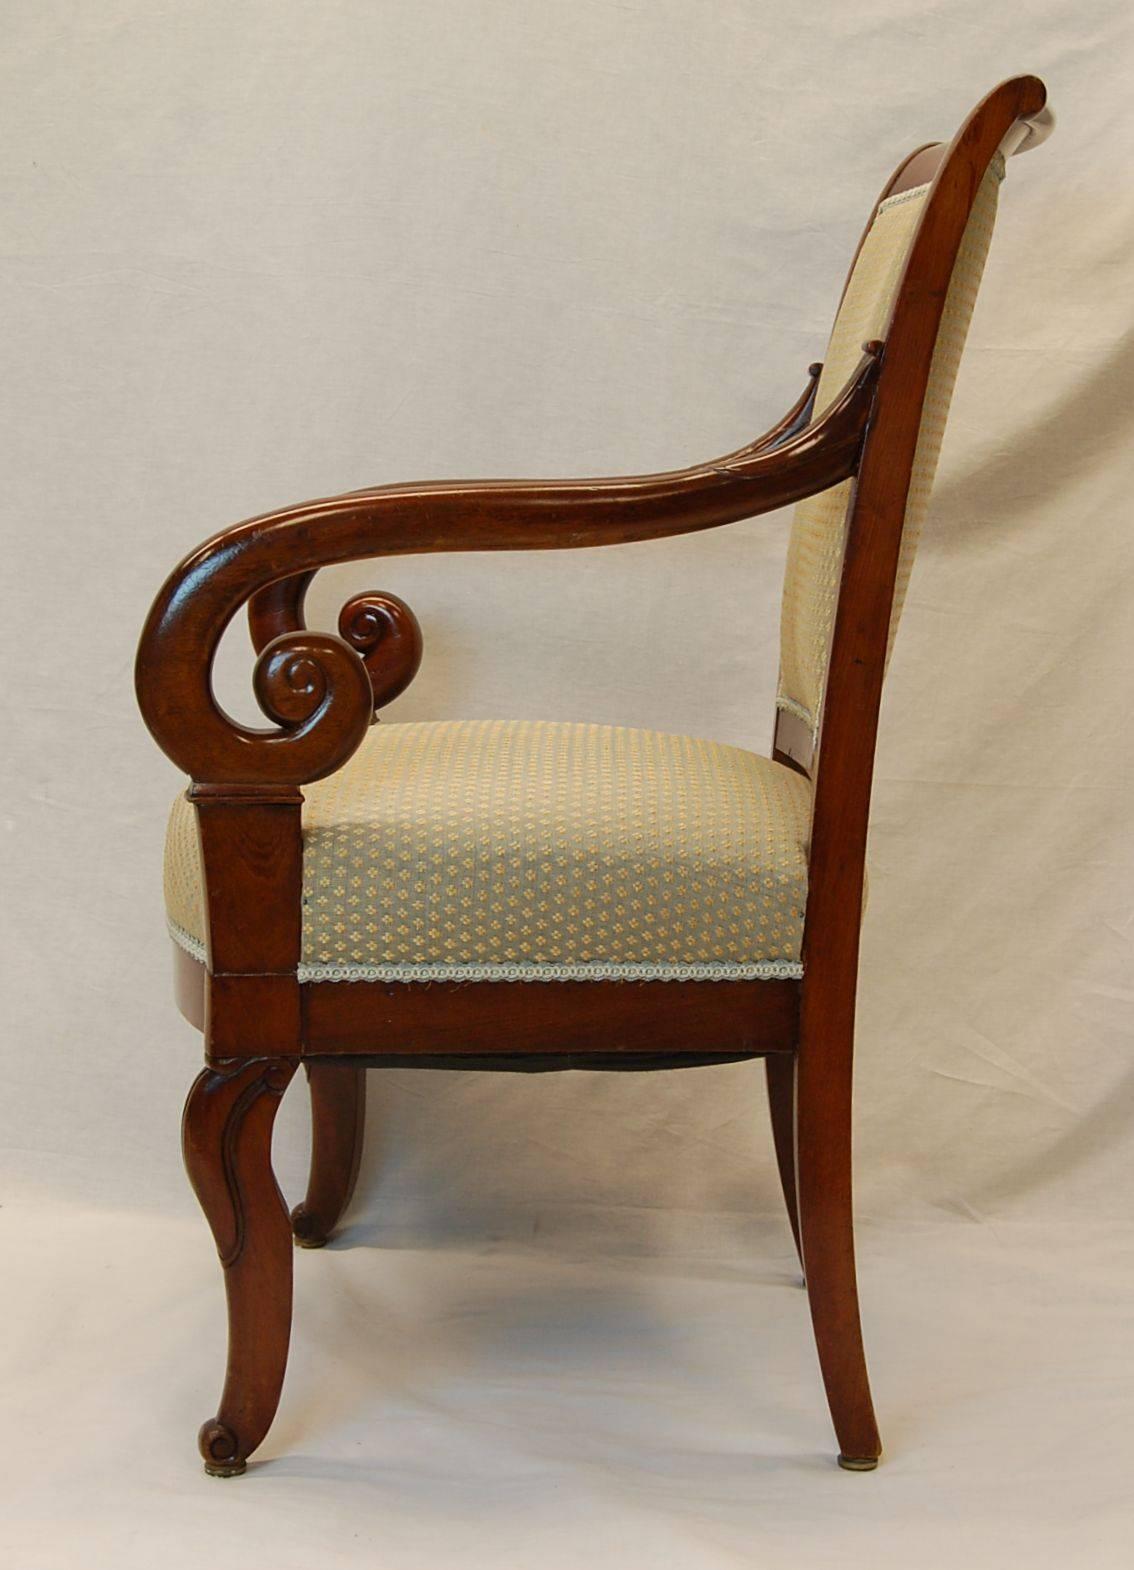 Pair of Carved Mahogany Restauration Period Armchairs, Early 19th Century For Sale 4